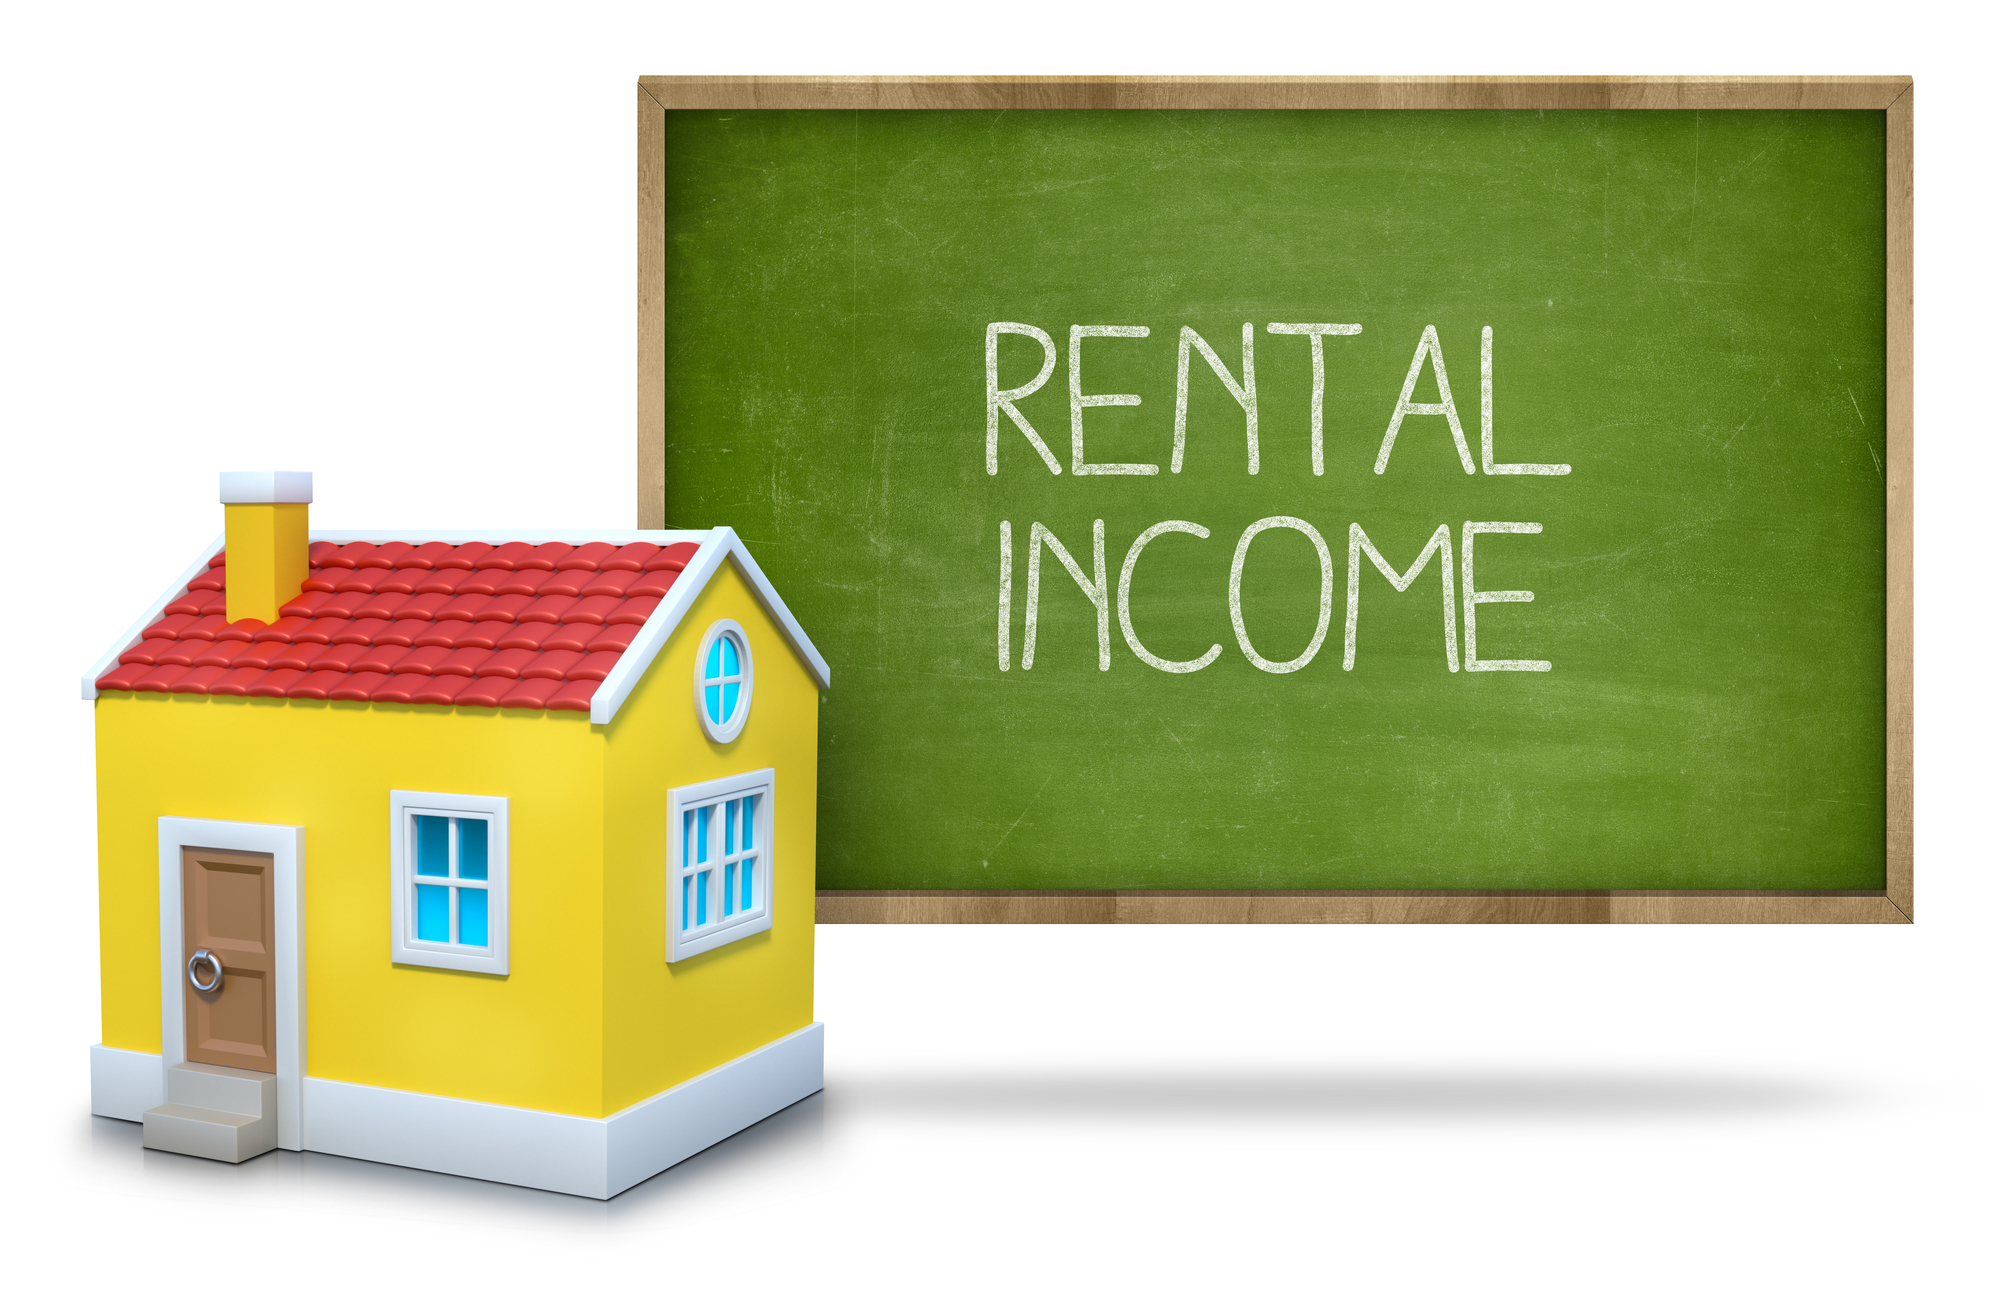 Rental income text on blackboard with 3d house